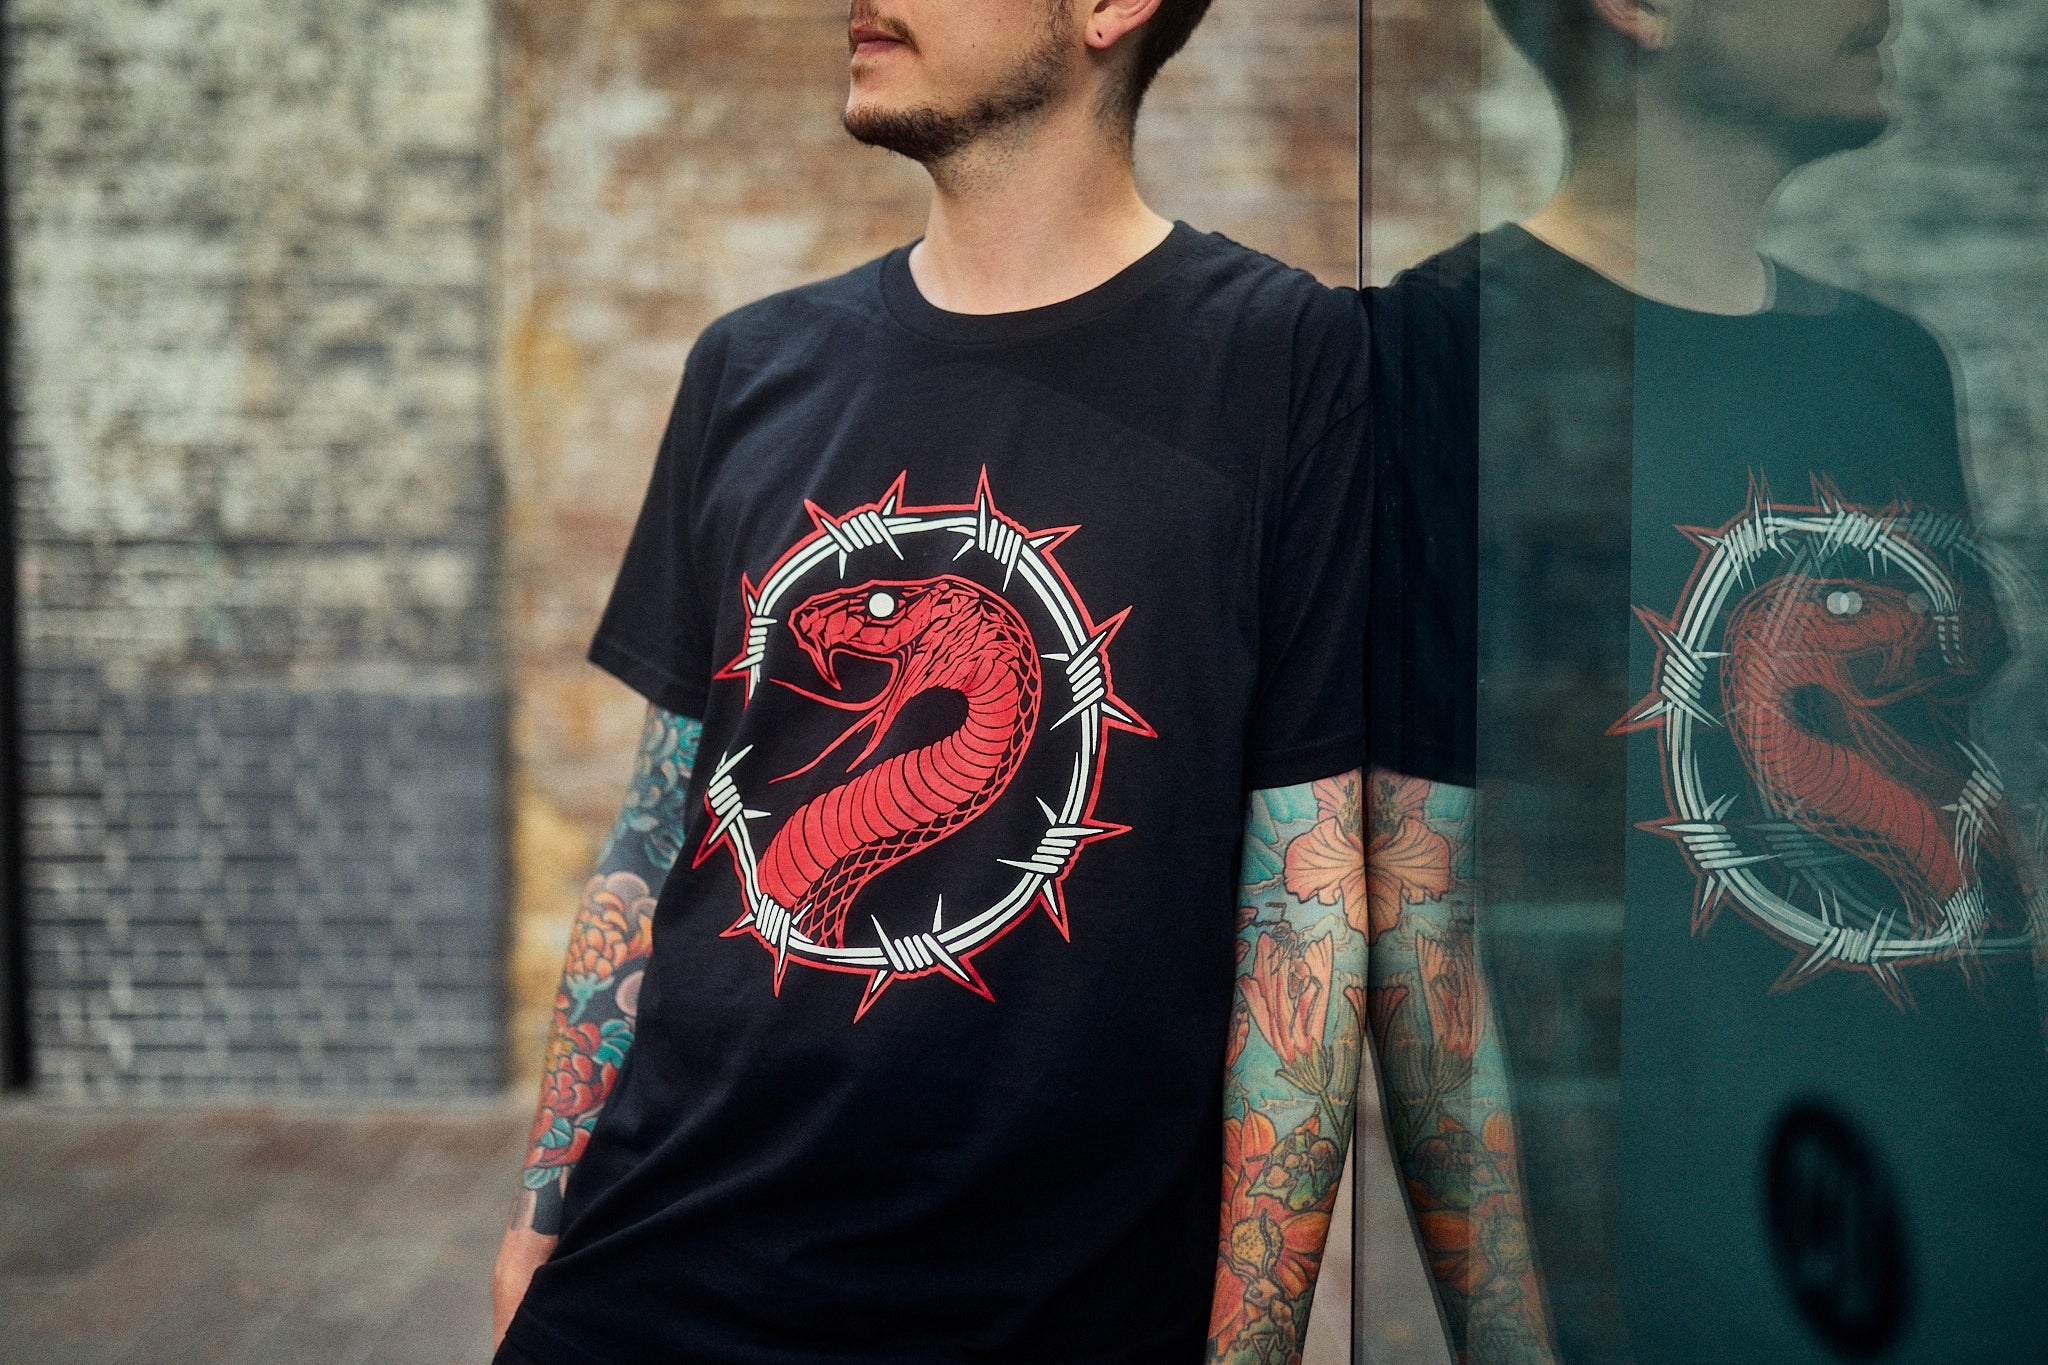 Barbed wire serpent t-shirt by Joao Bosco